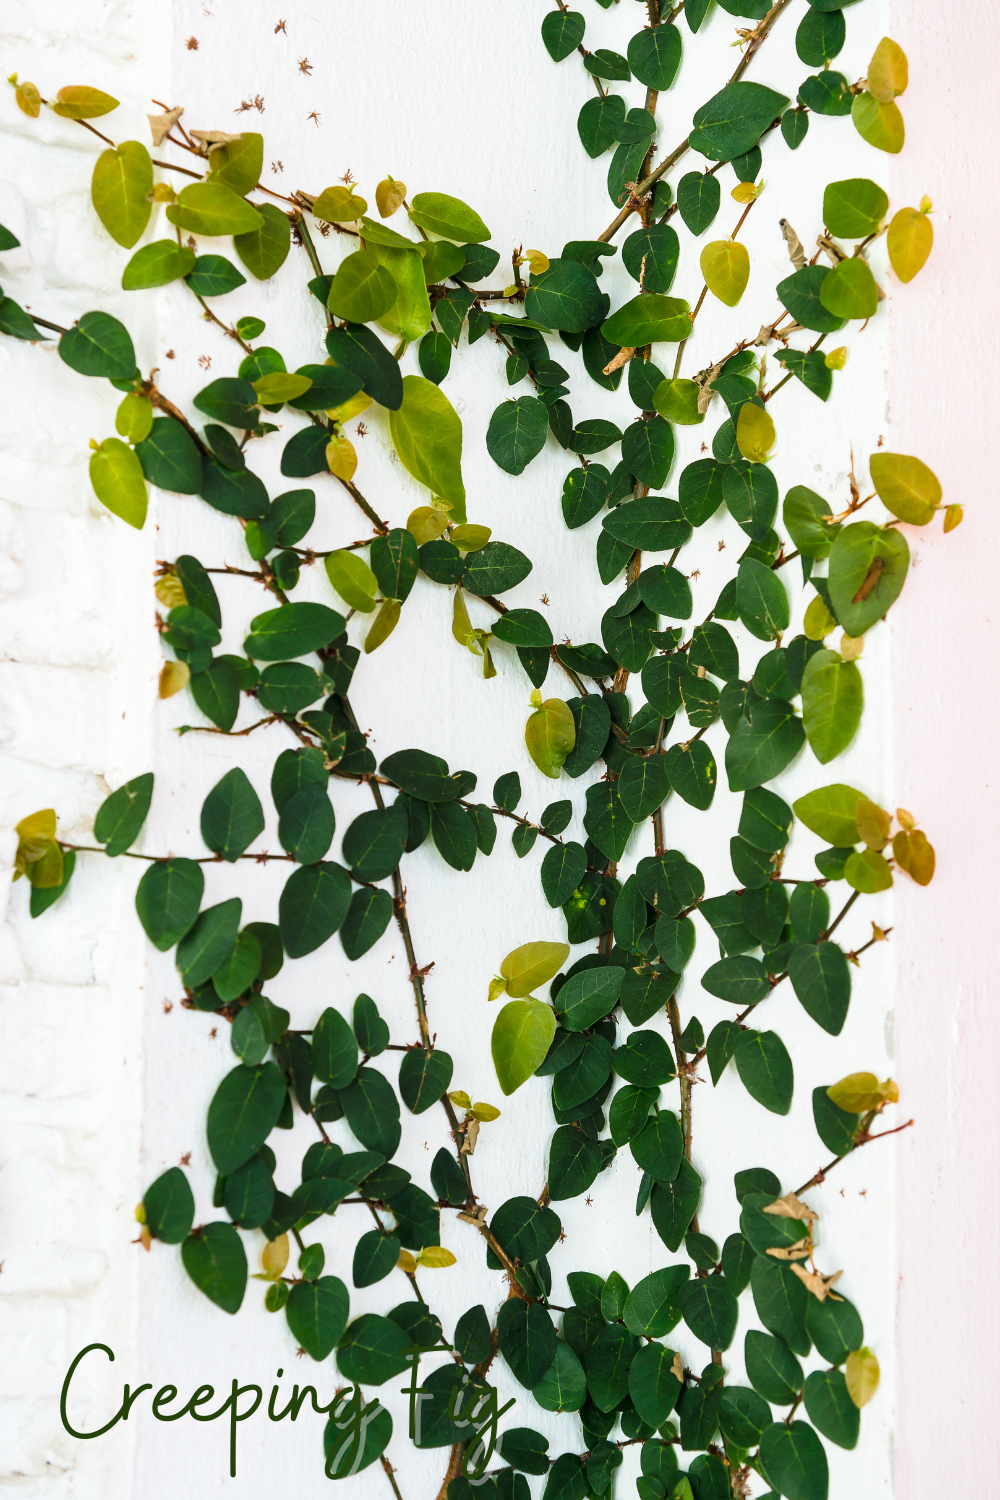 A picture of a creeping fig growing in a bathroom.